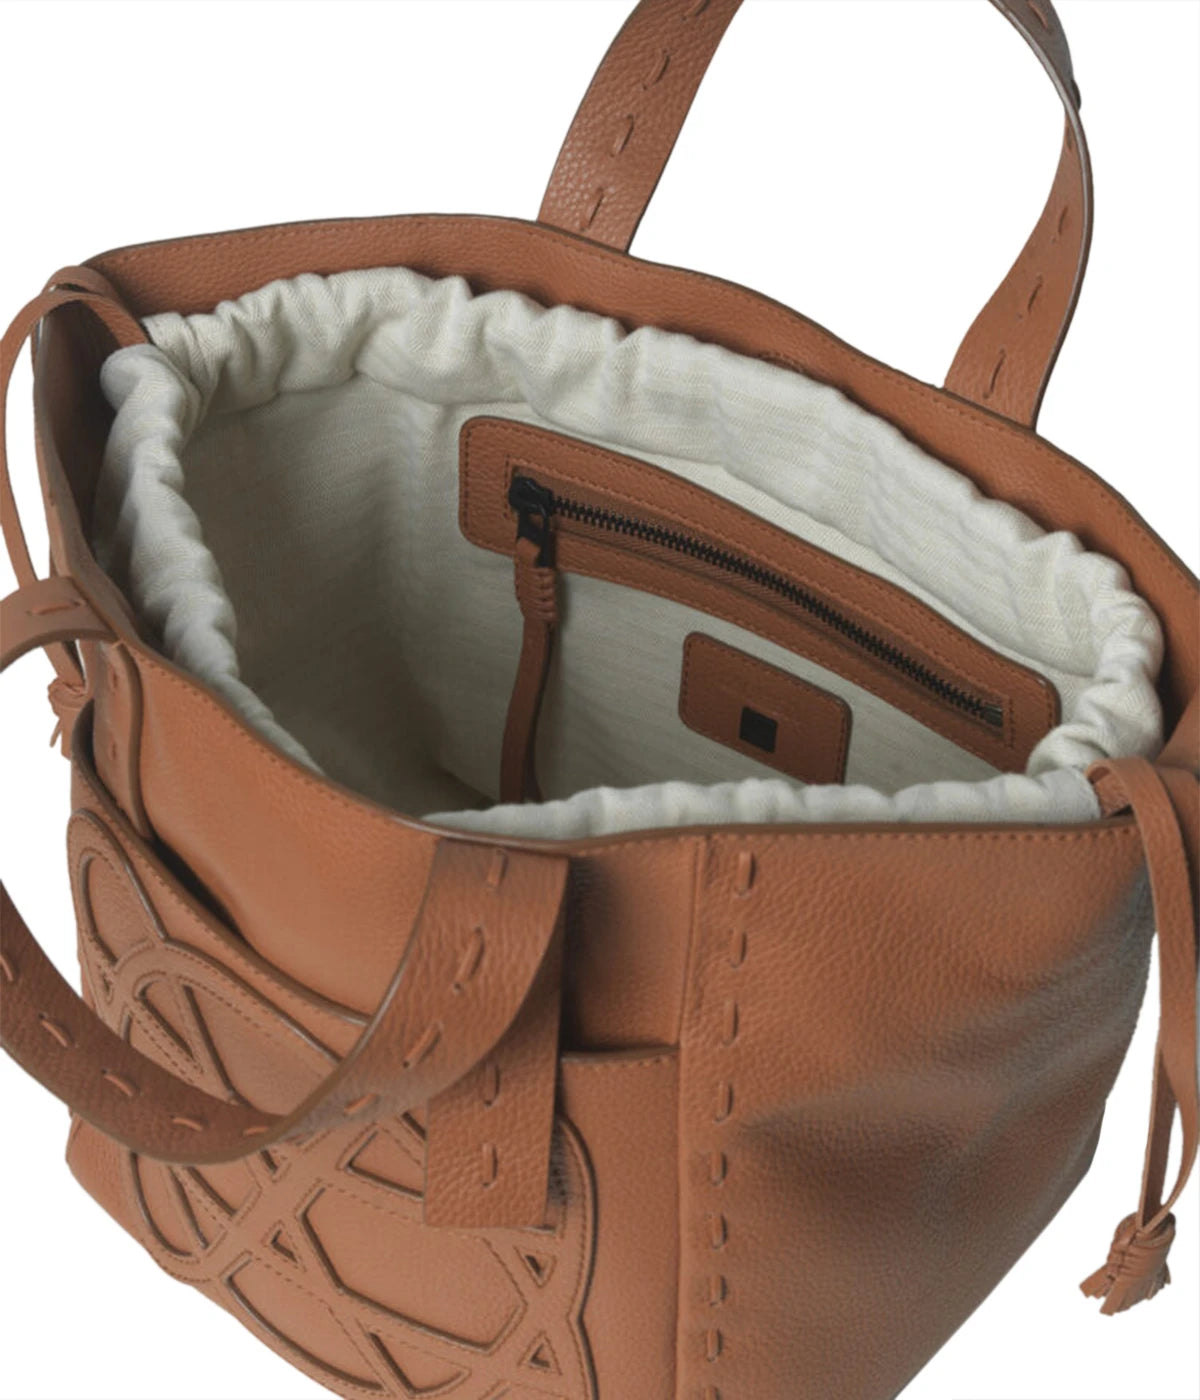 Cleo Grained Leather Bag in Caramel